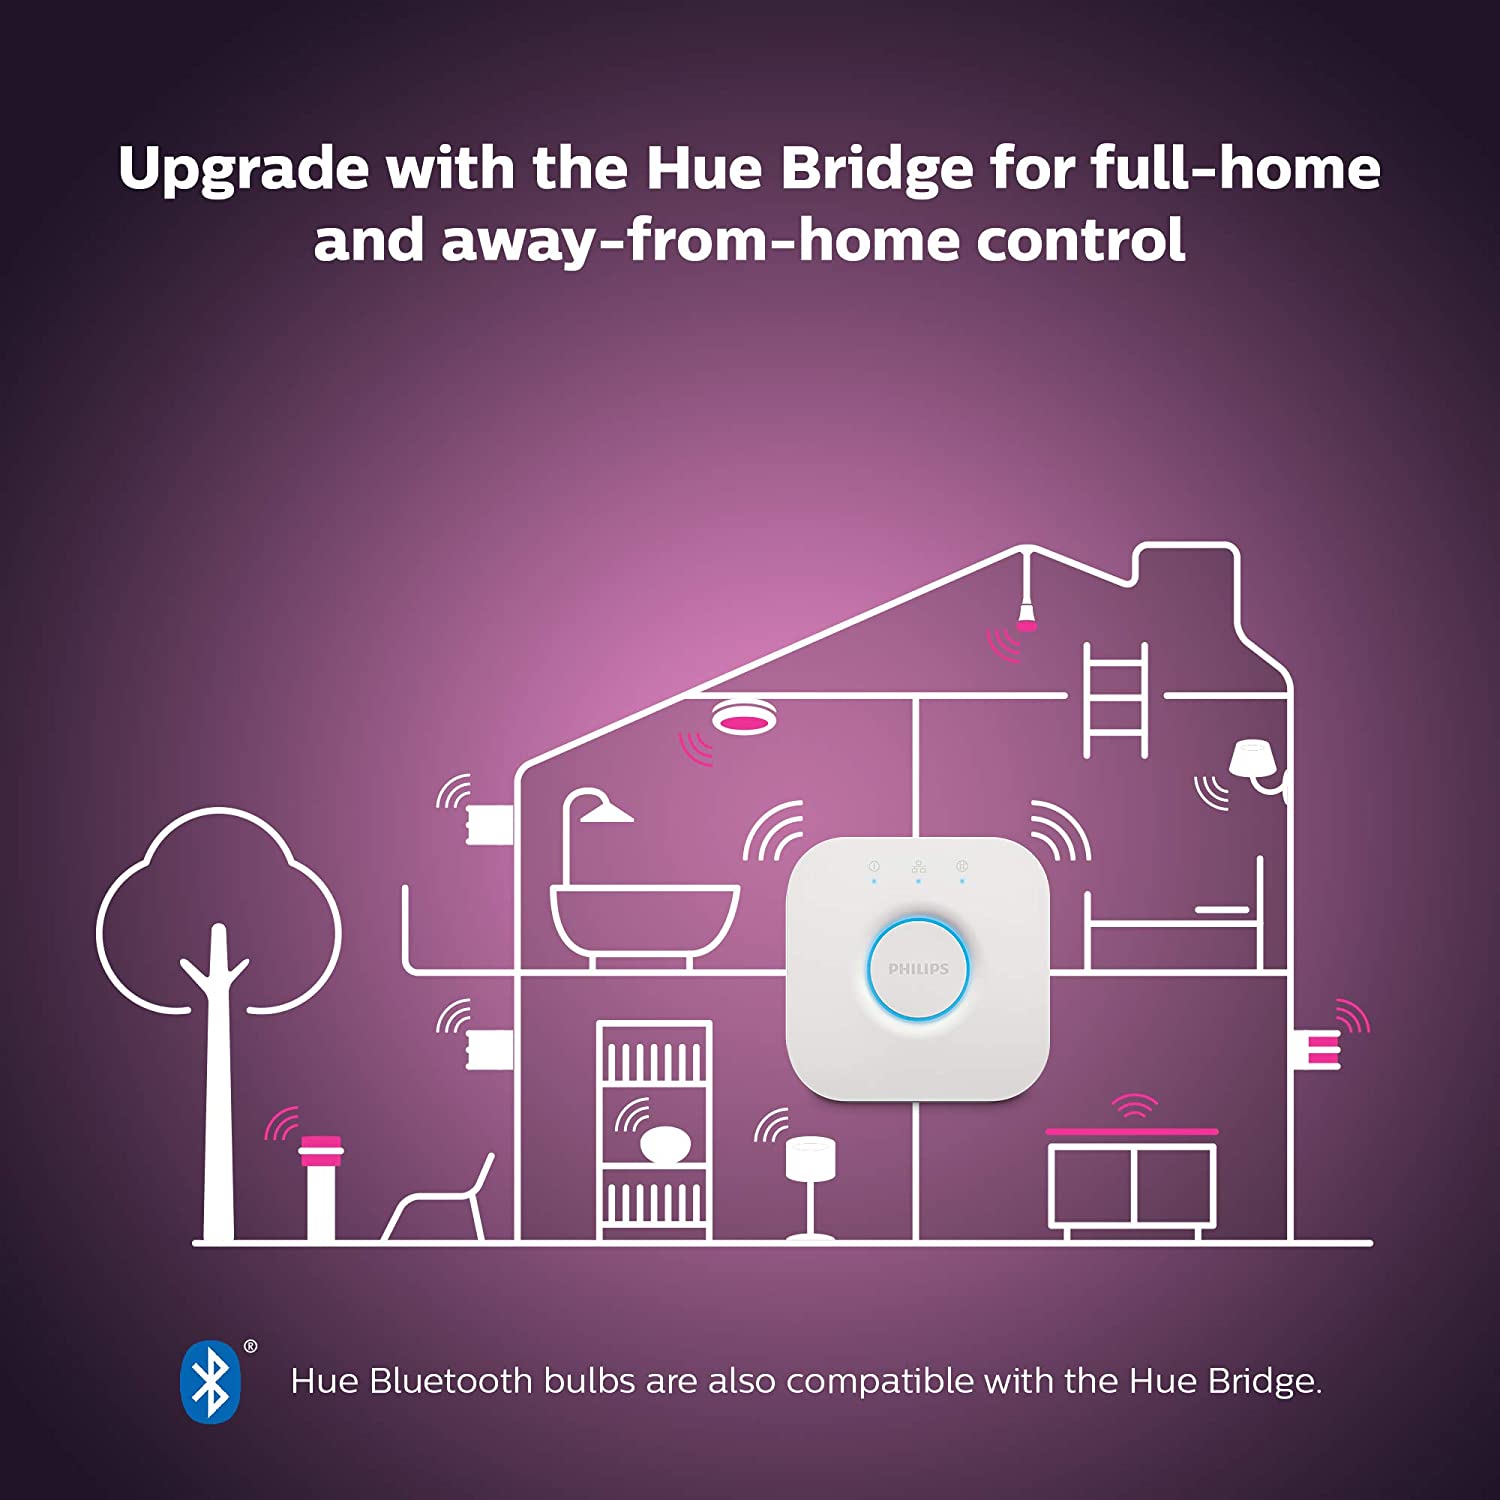 Philips Hue White and colour ambience Go portable light (latest model)